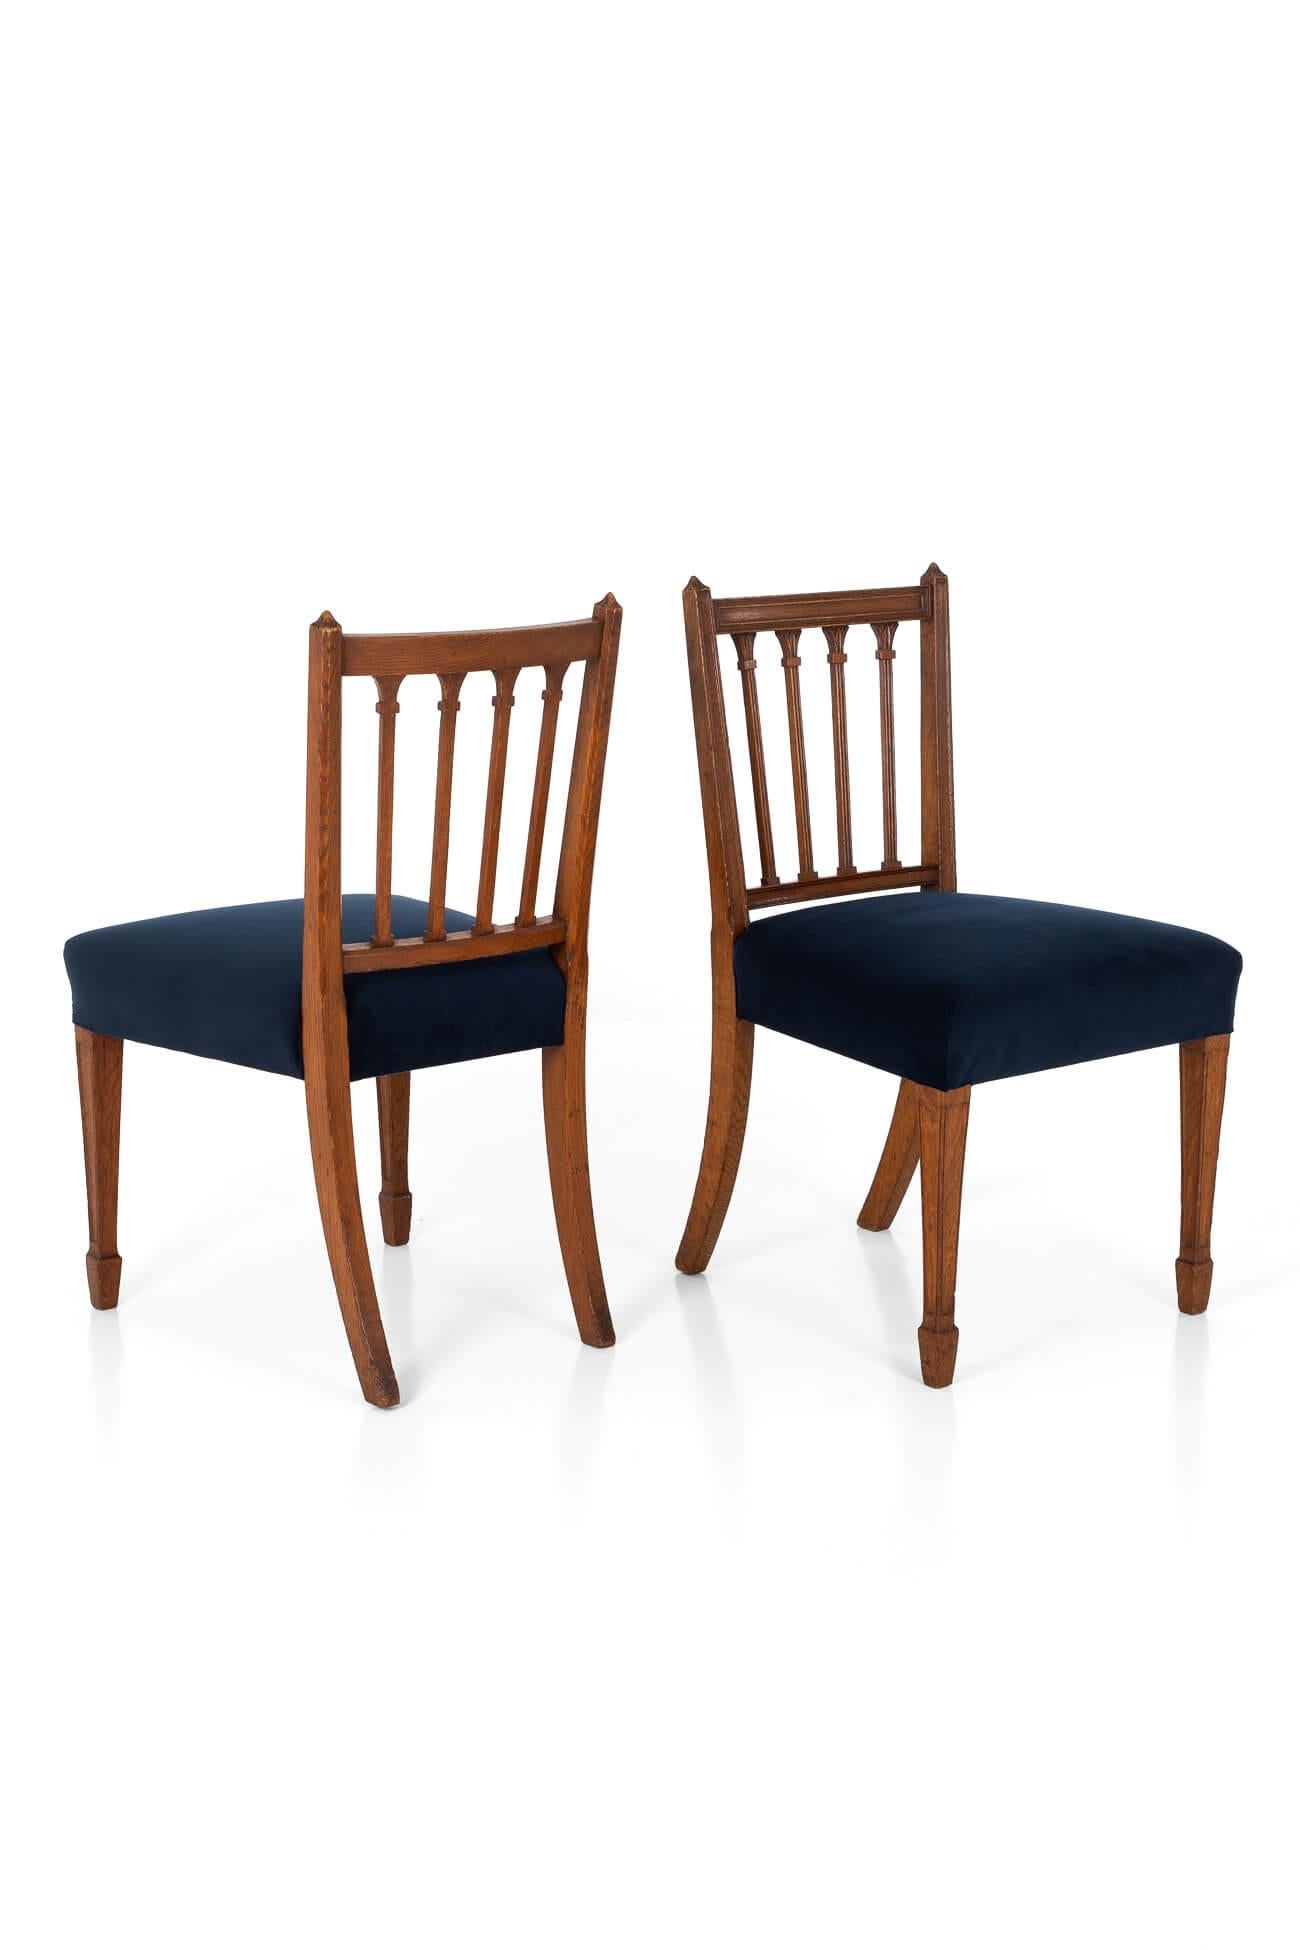 A wonderful pair of James Shoolbred occasional chairs in mahogany.

The gothic style chairs have a square back with four vertical slats.

Featuring Marlborough front legs and sabre legs to the rear.

Freshly reupholstered in dark indigo velvet, with